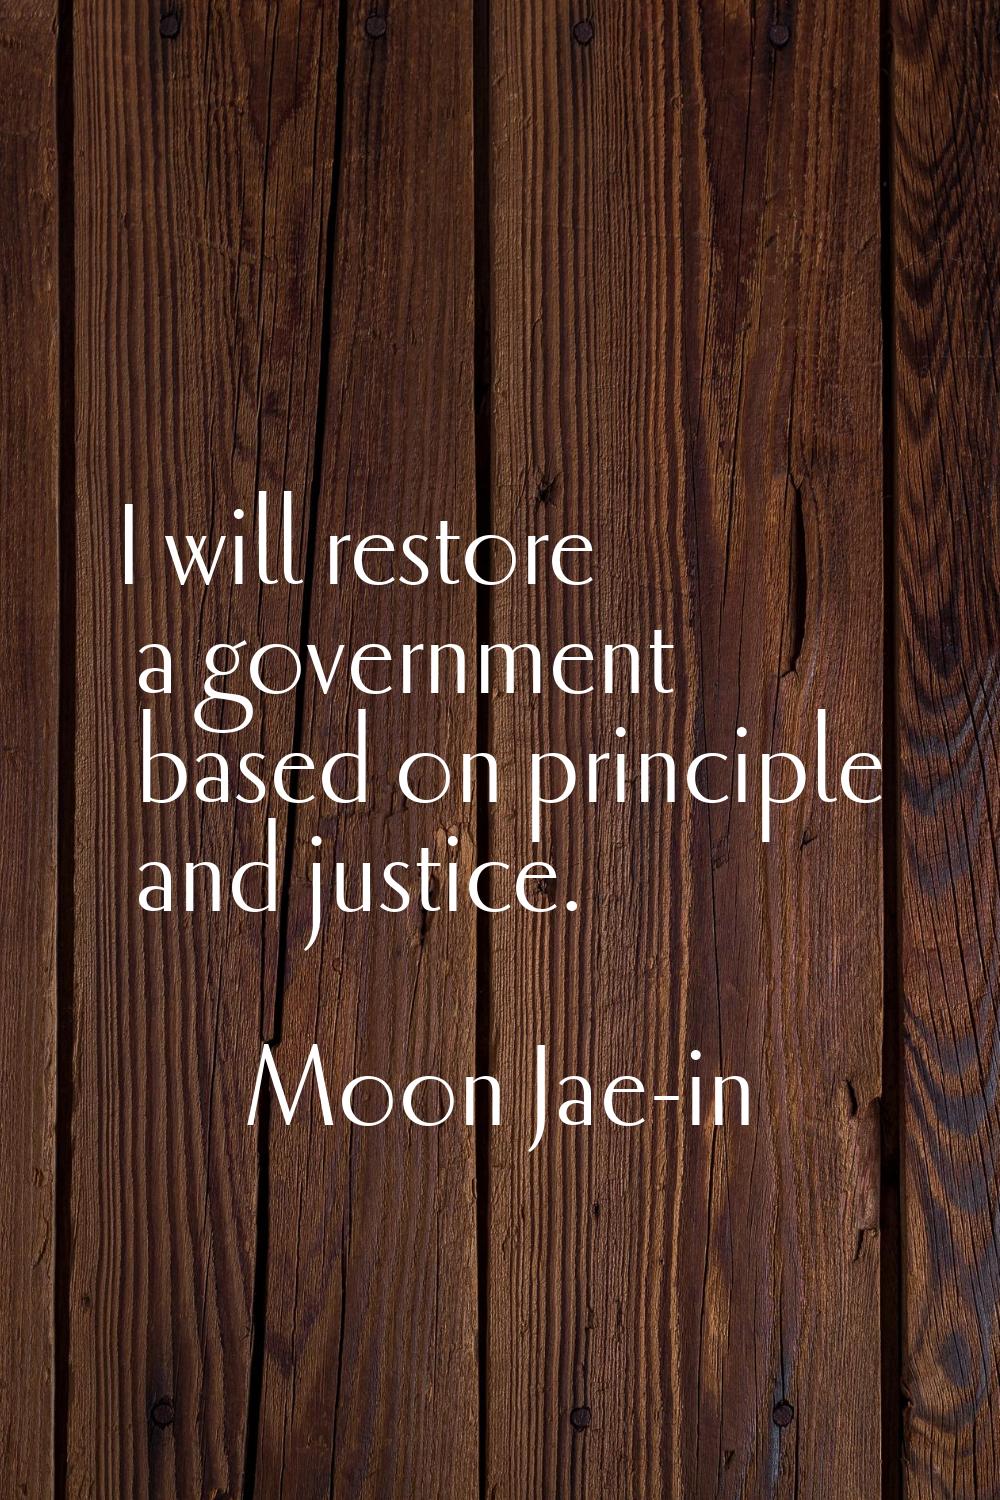 I will restore a government based on principle and justice.